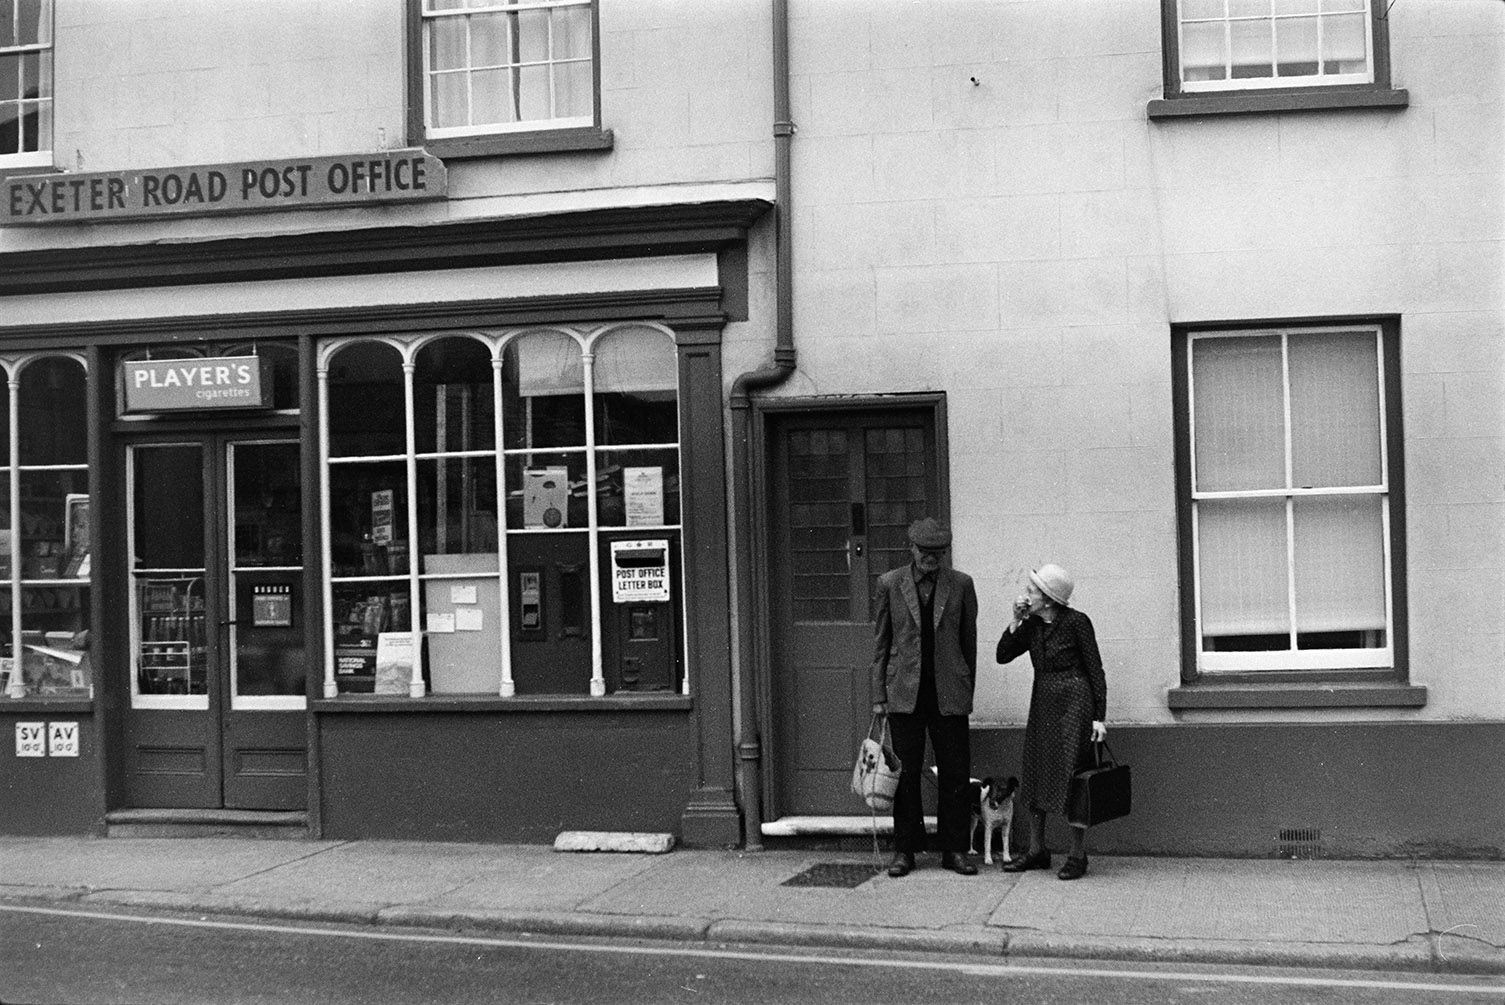 The shop front of the Exeter Road Post Office, in Crediton. A post box is set into the shop window and a man and woman are talking on the street outside with a dog.